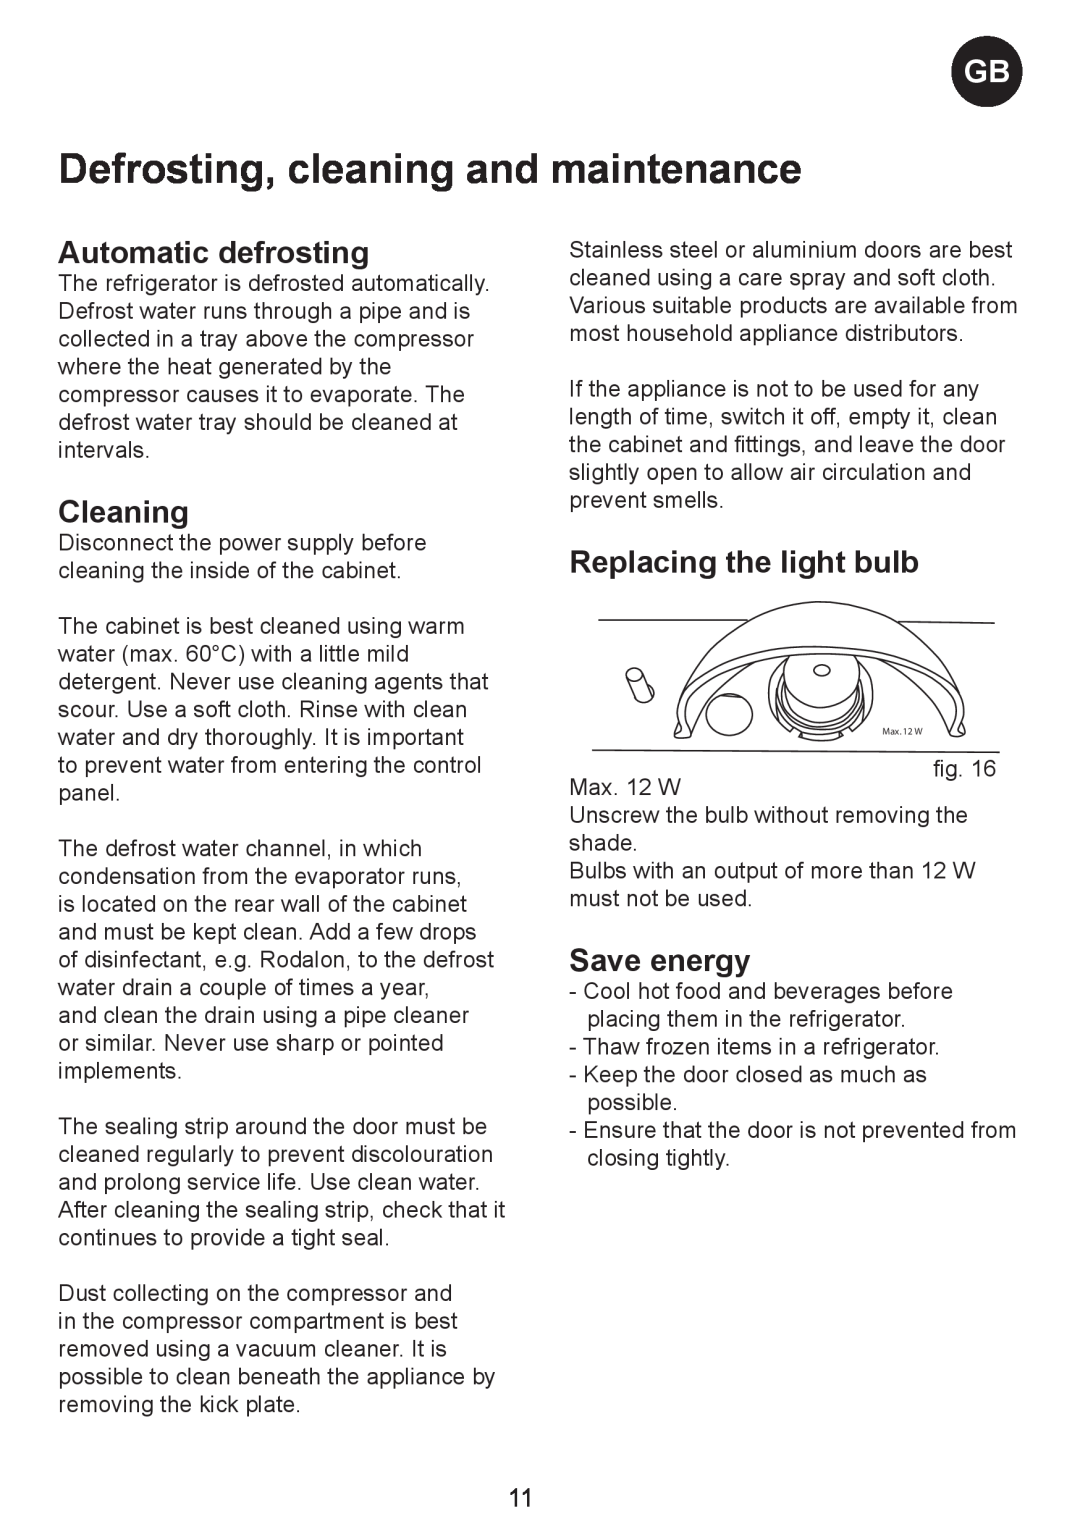 Smeg SW Range Defrosting, cleaning and maintenance, Automatic defrosting, Cleaning, Replacing the light bulb, Save energy 